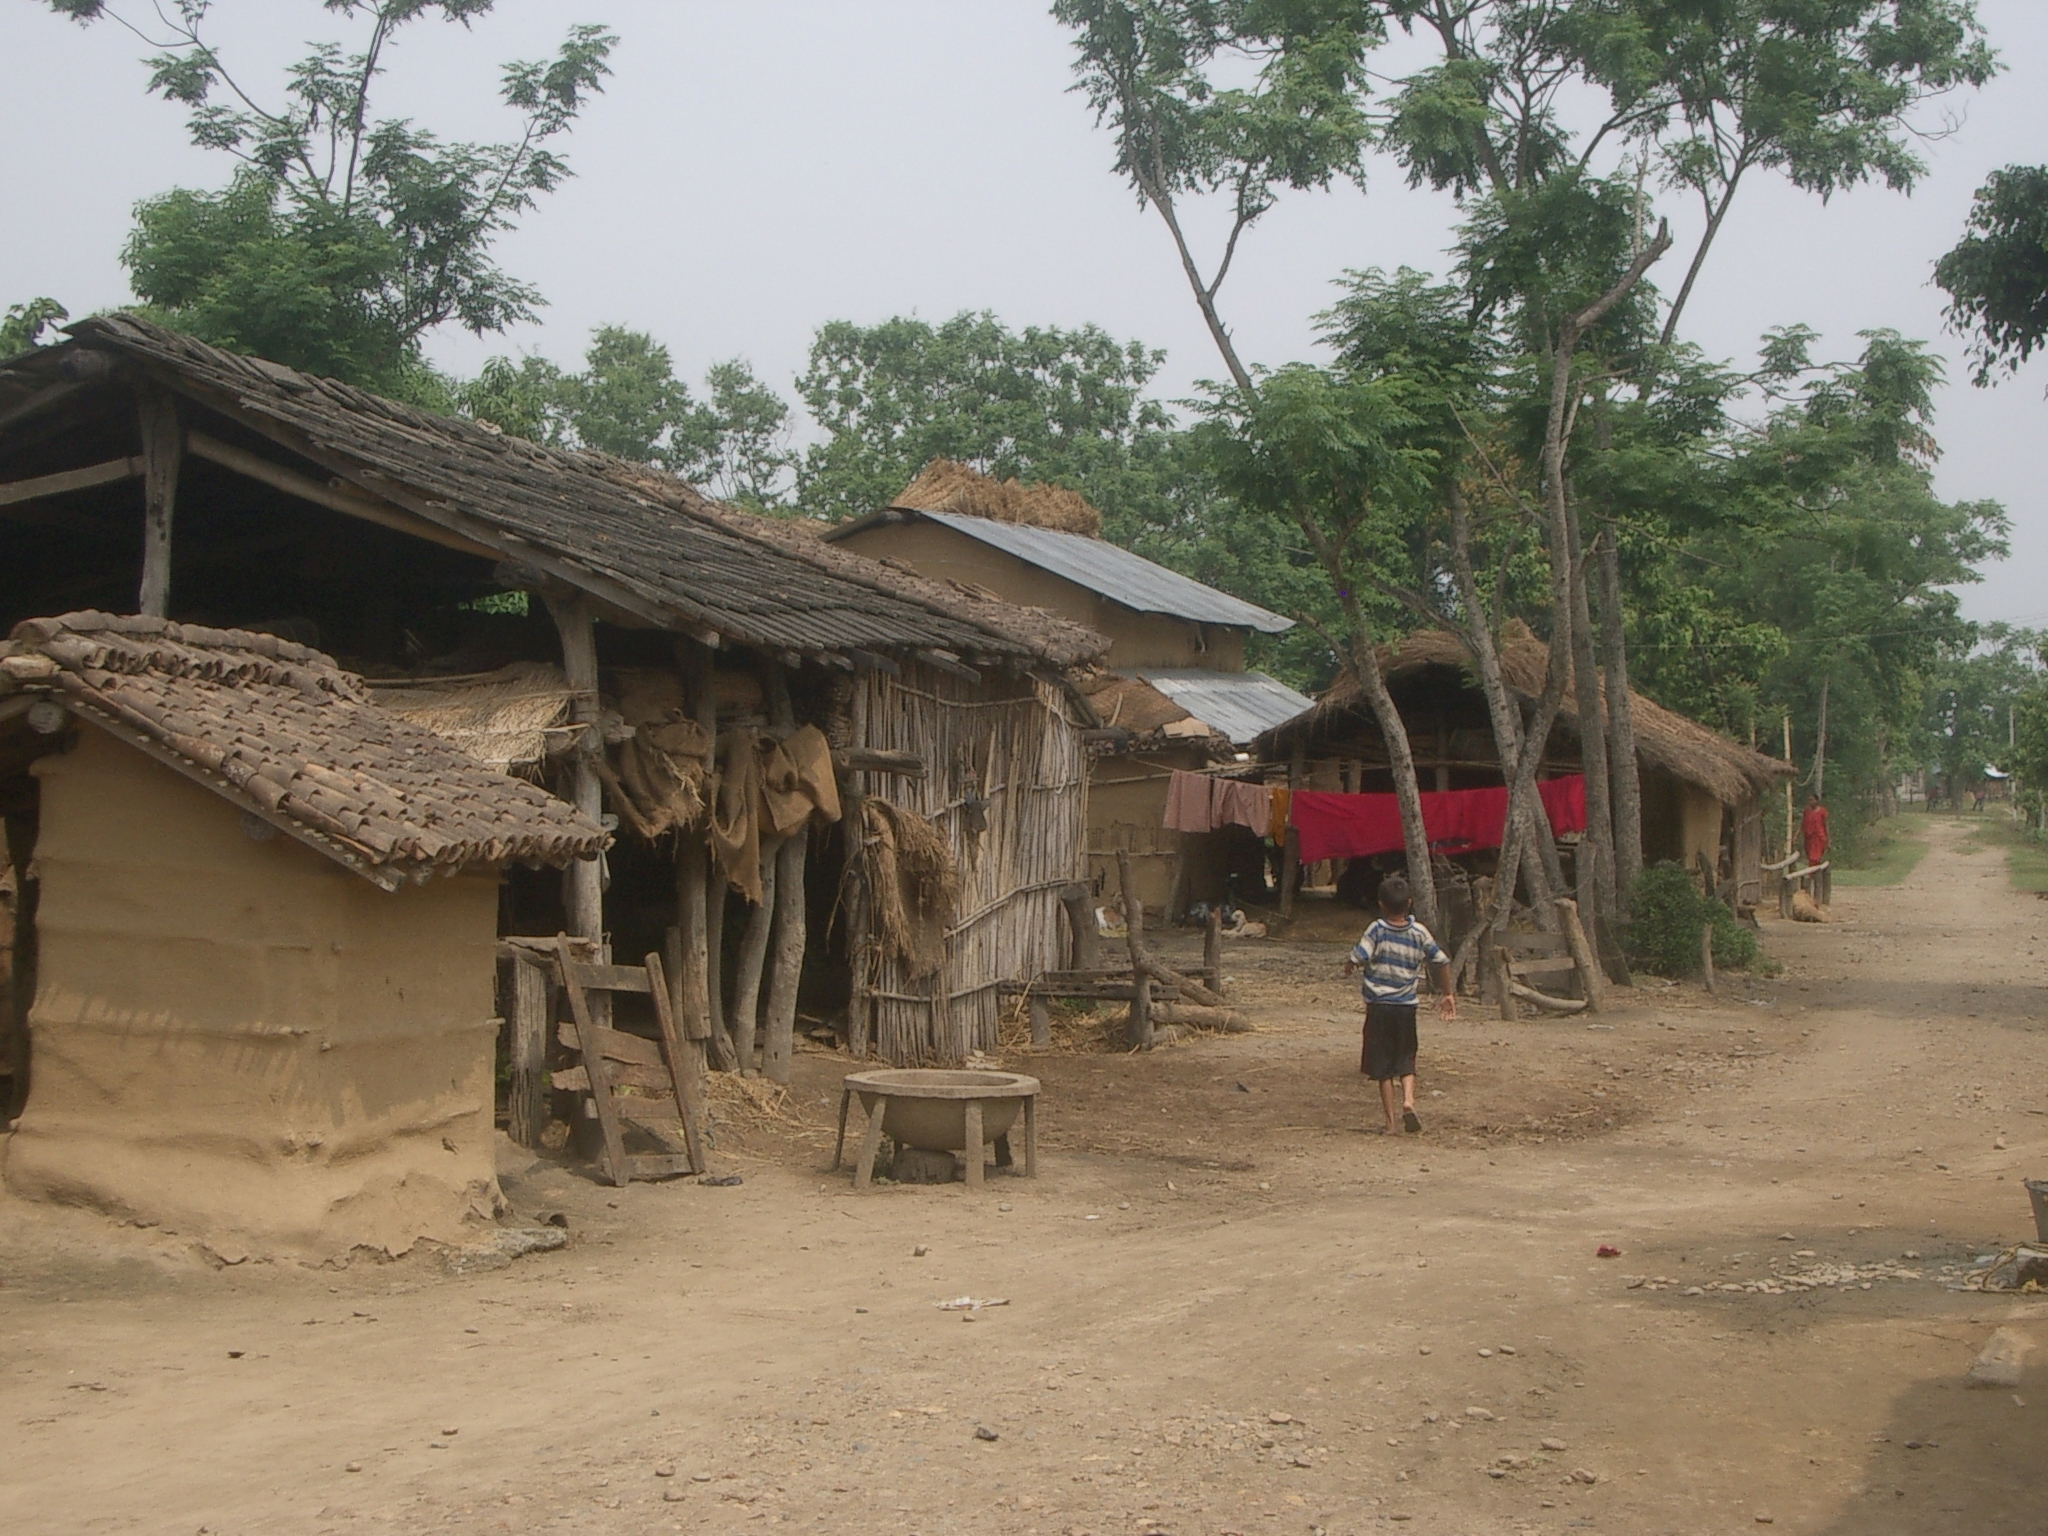 a person walking down a dirt road by some huts